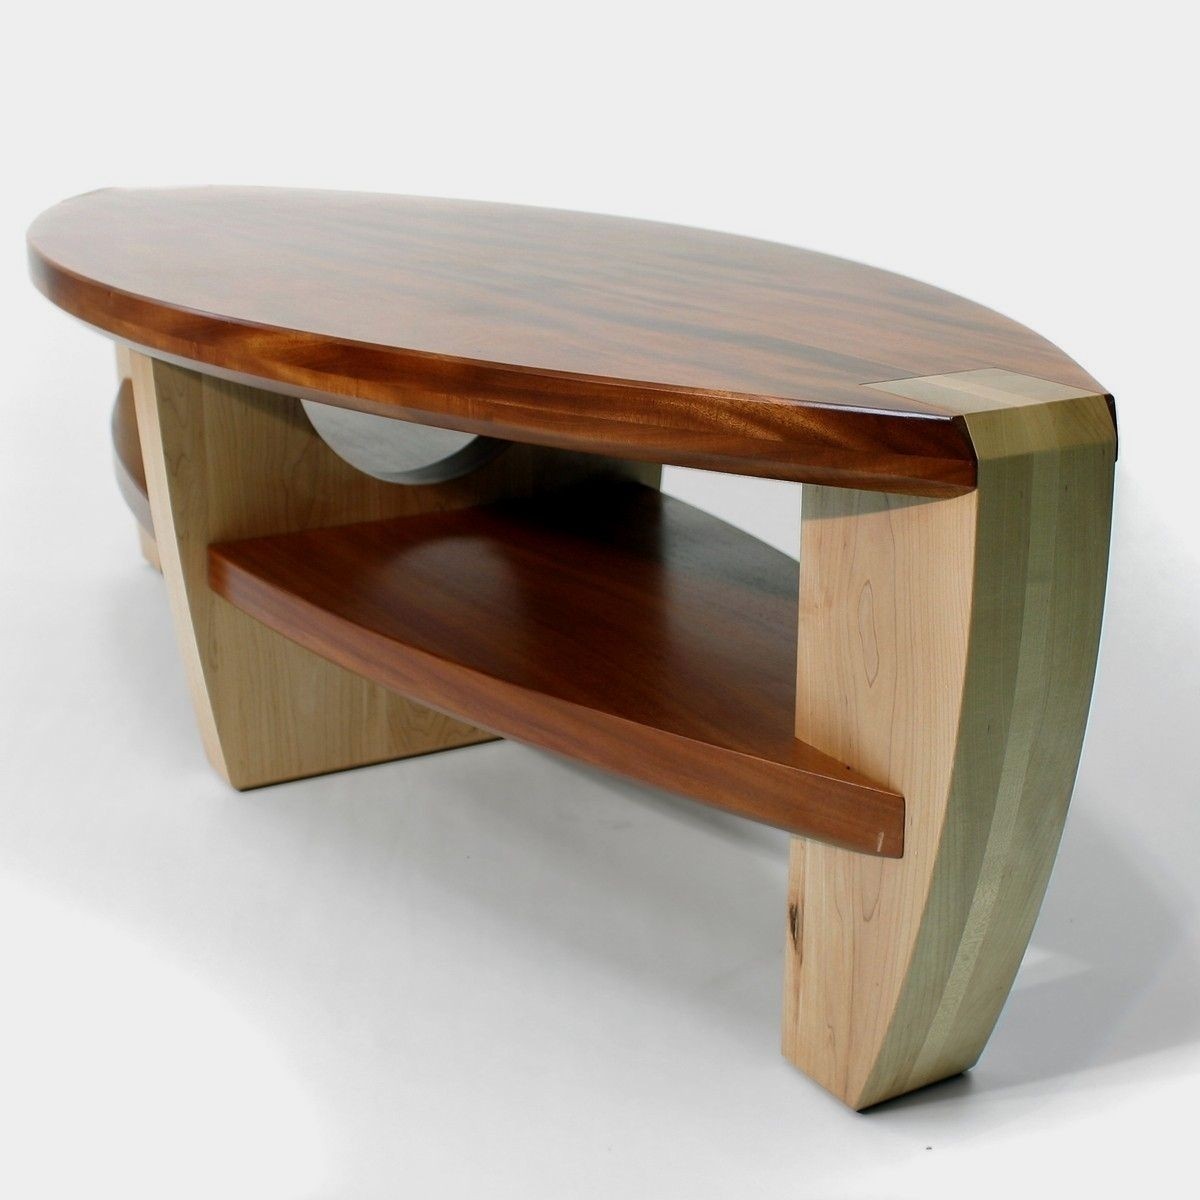 Hand crafted coffee table by pagomo designs i love the